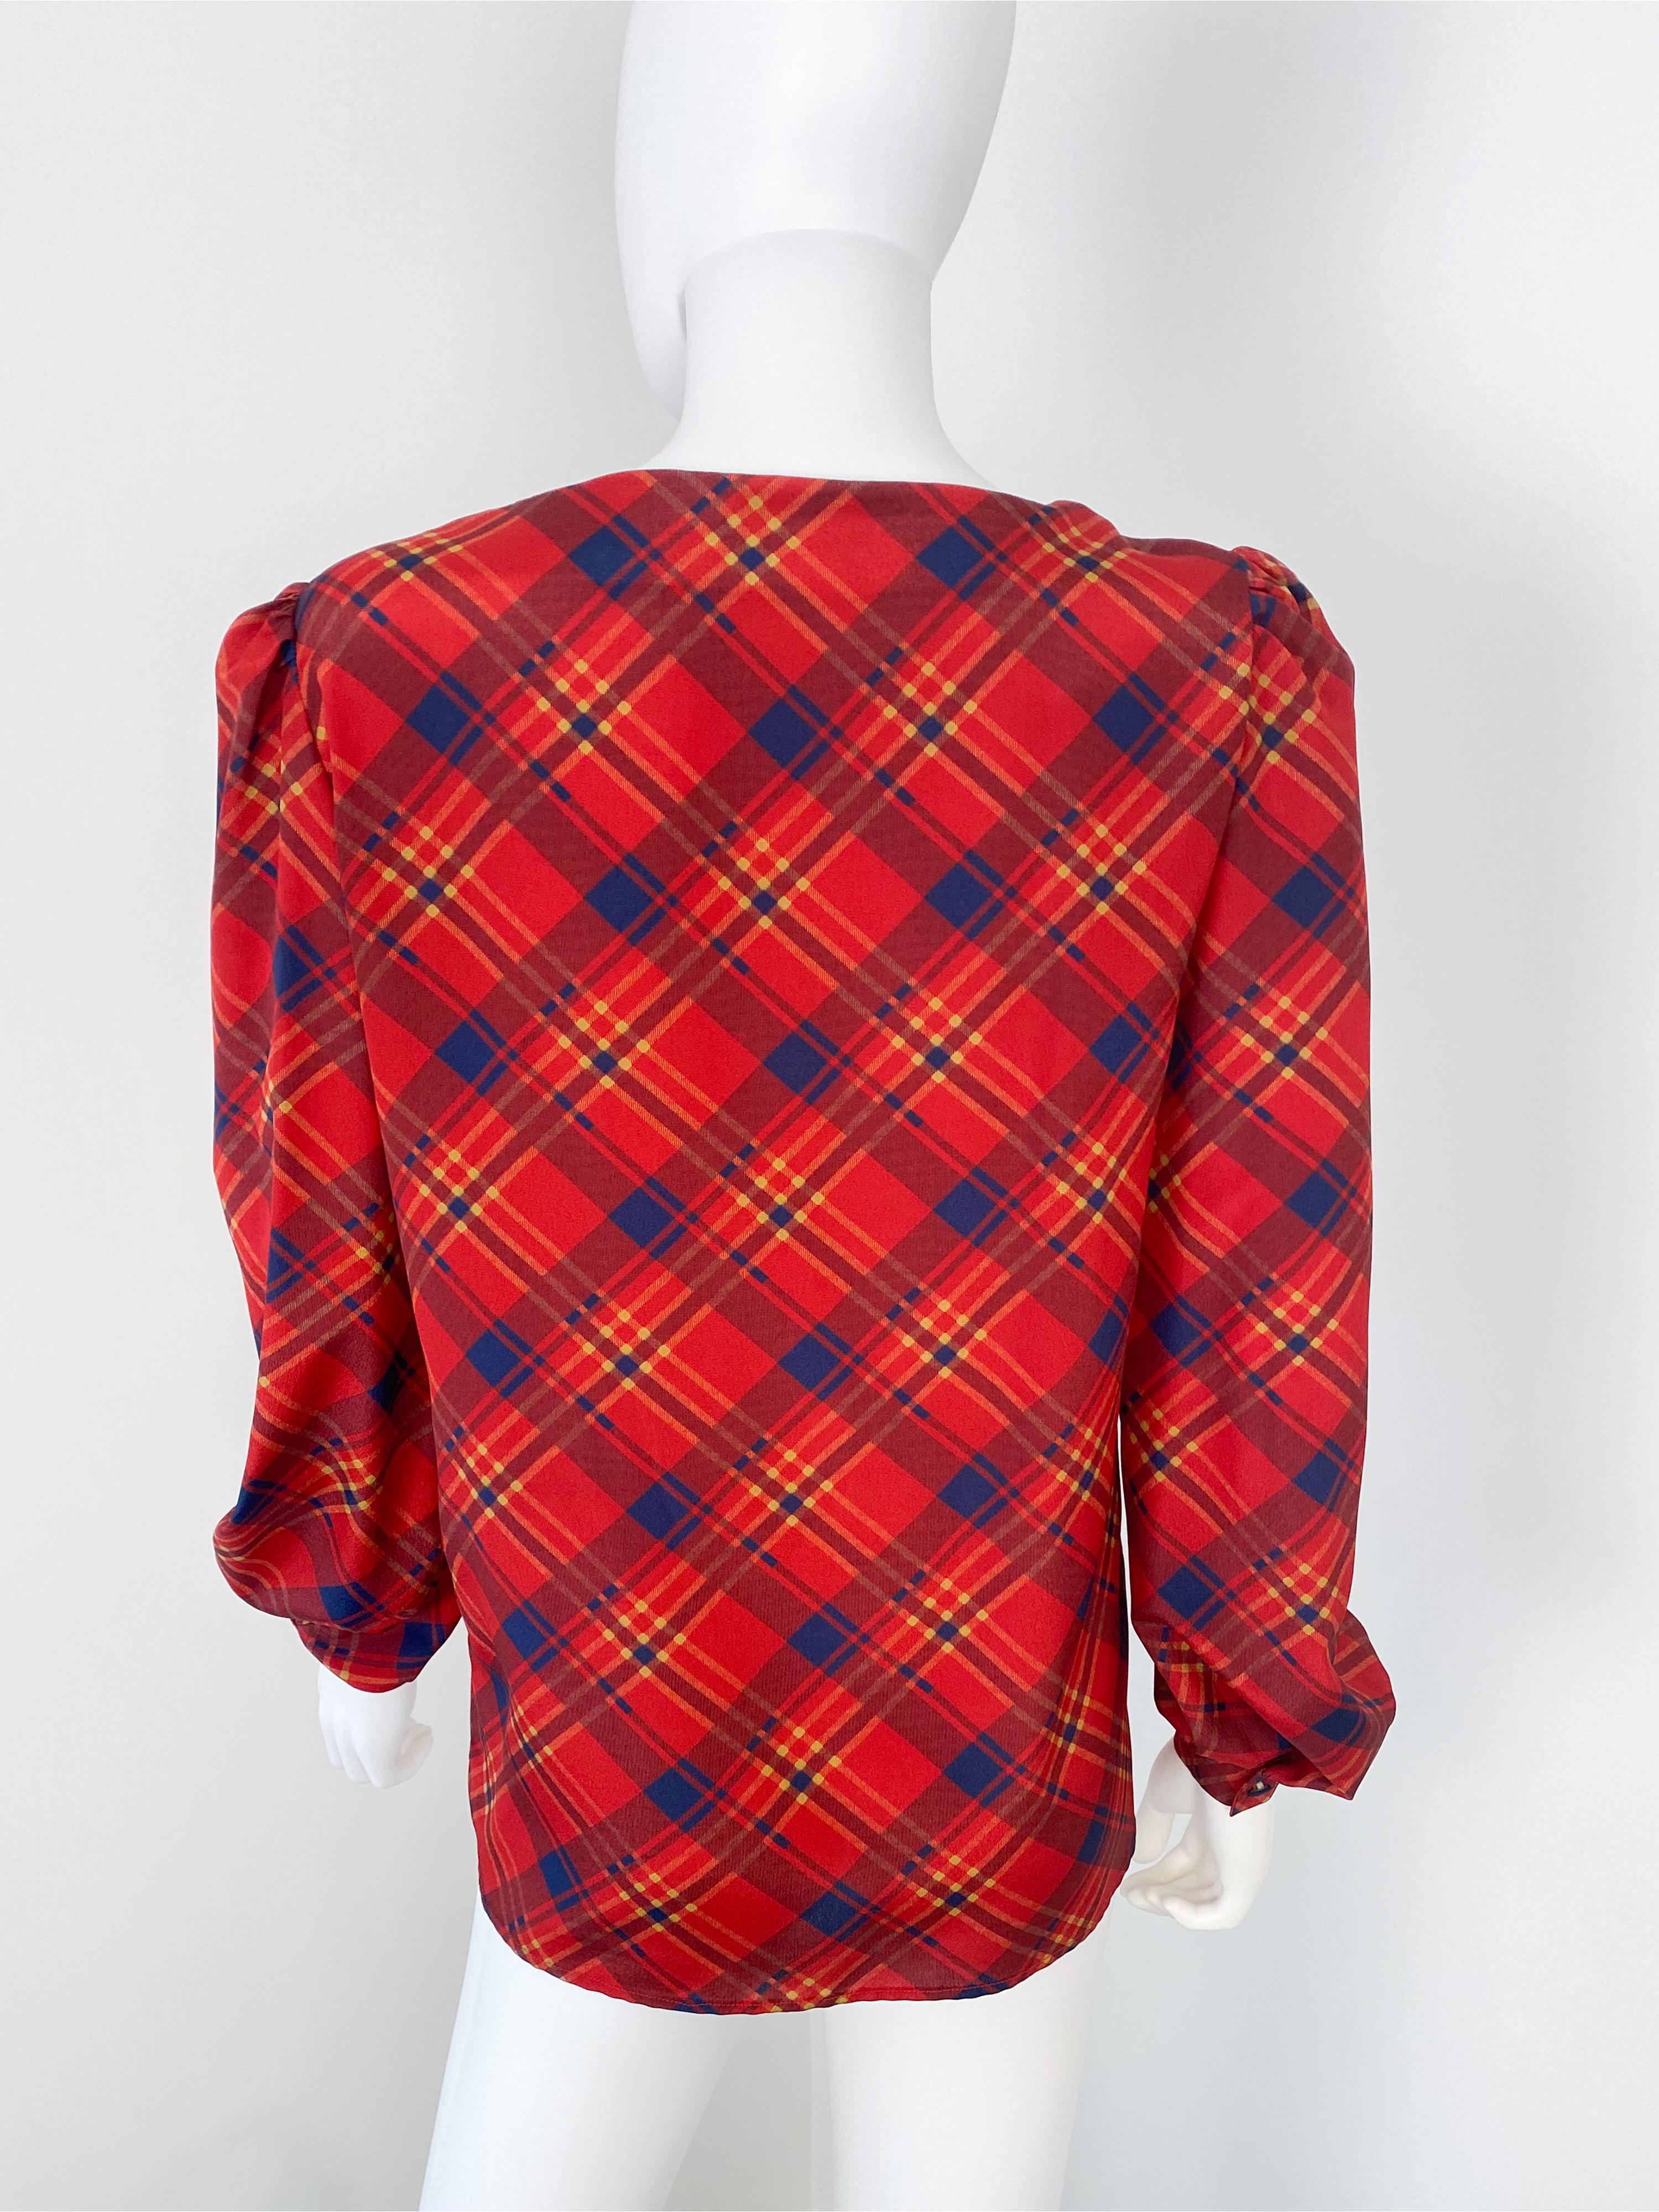 Vintage 1980s Silky Polyester Blouse Top Red and Blue Tartan Size 6/8 For Sale 10